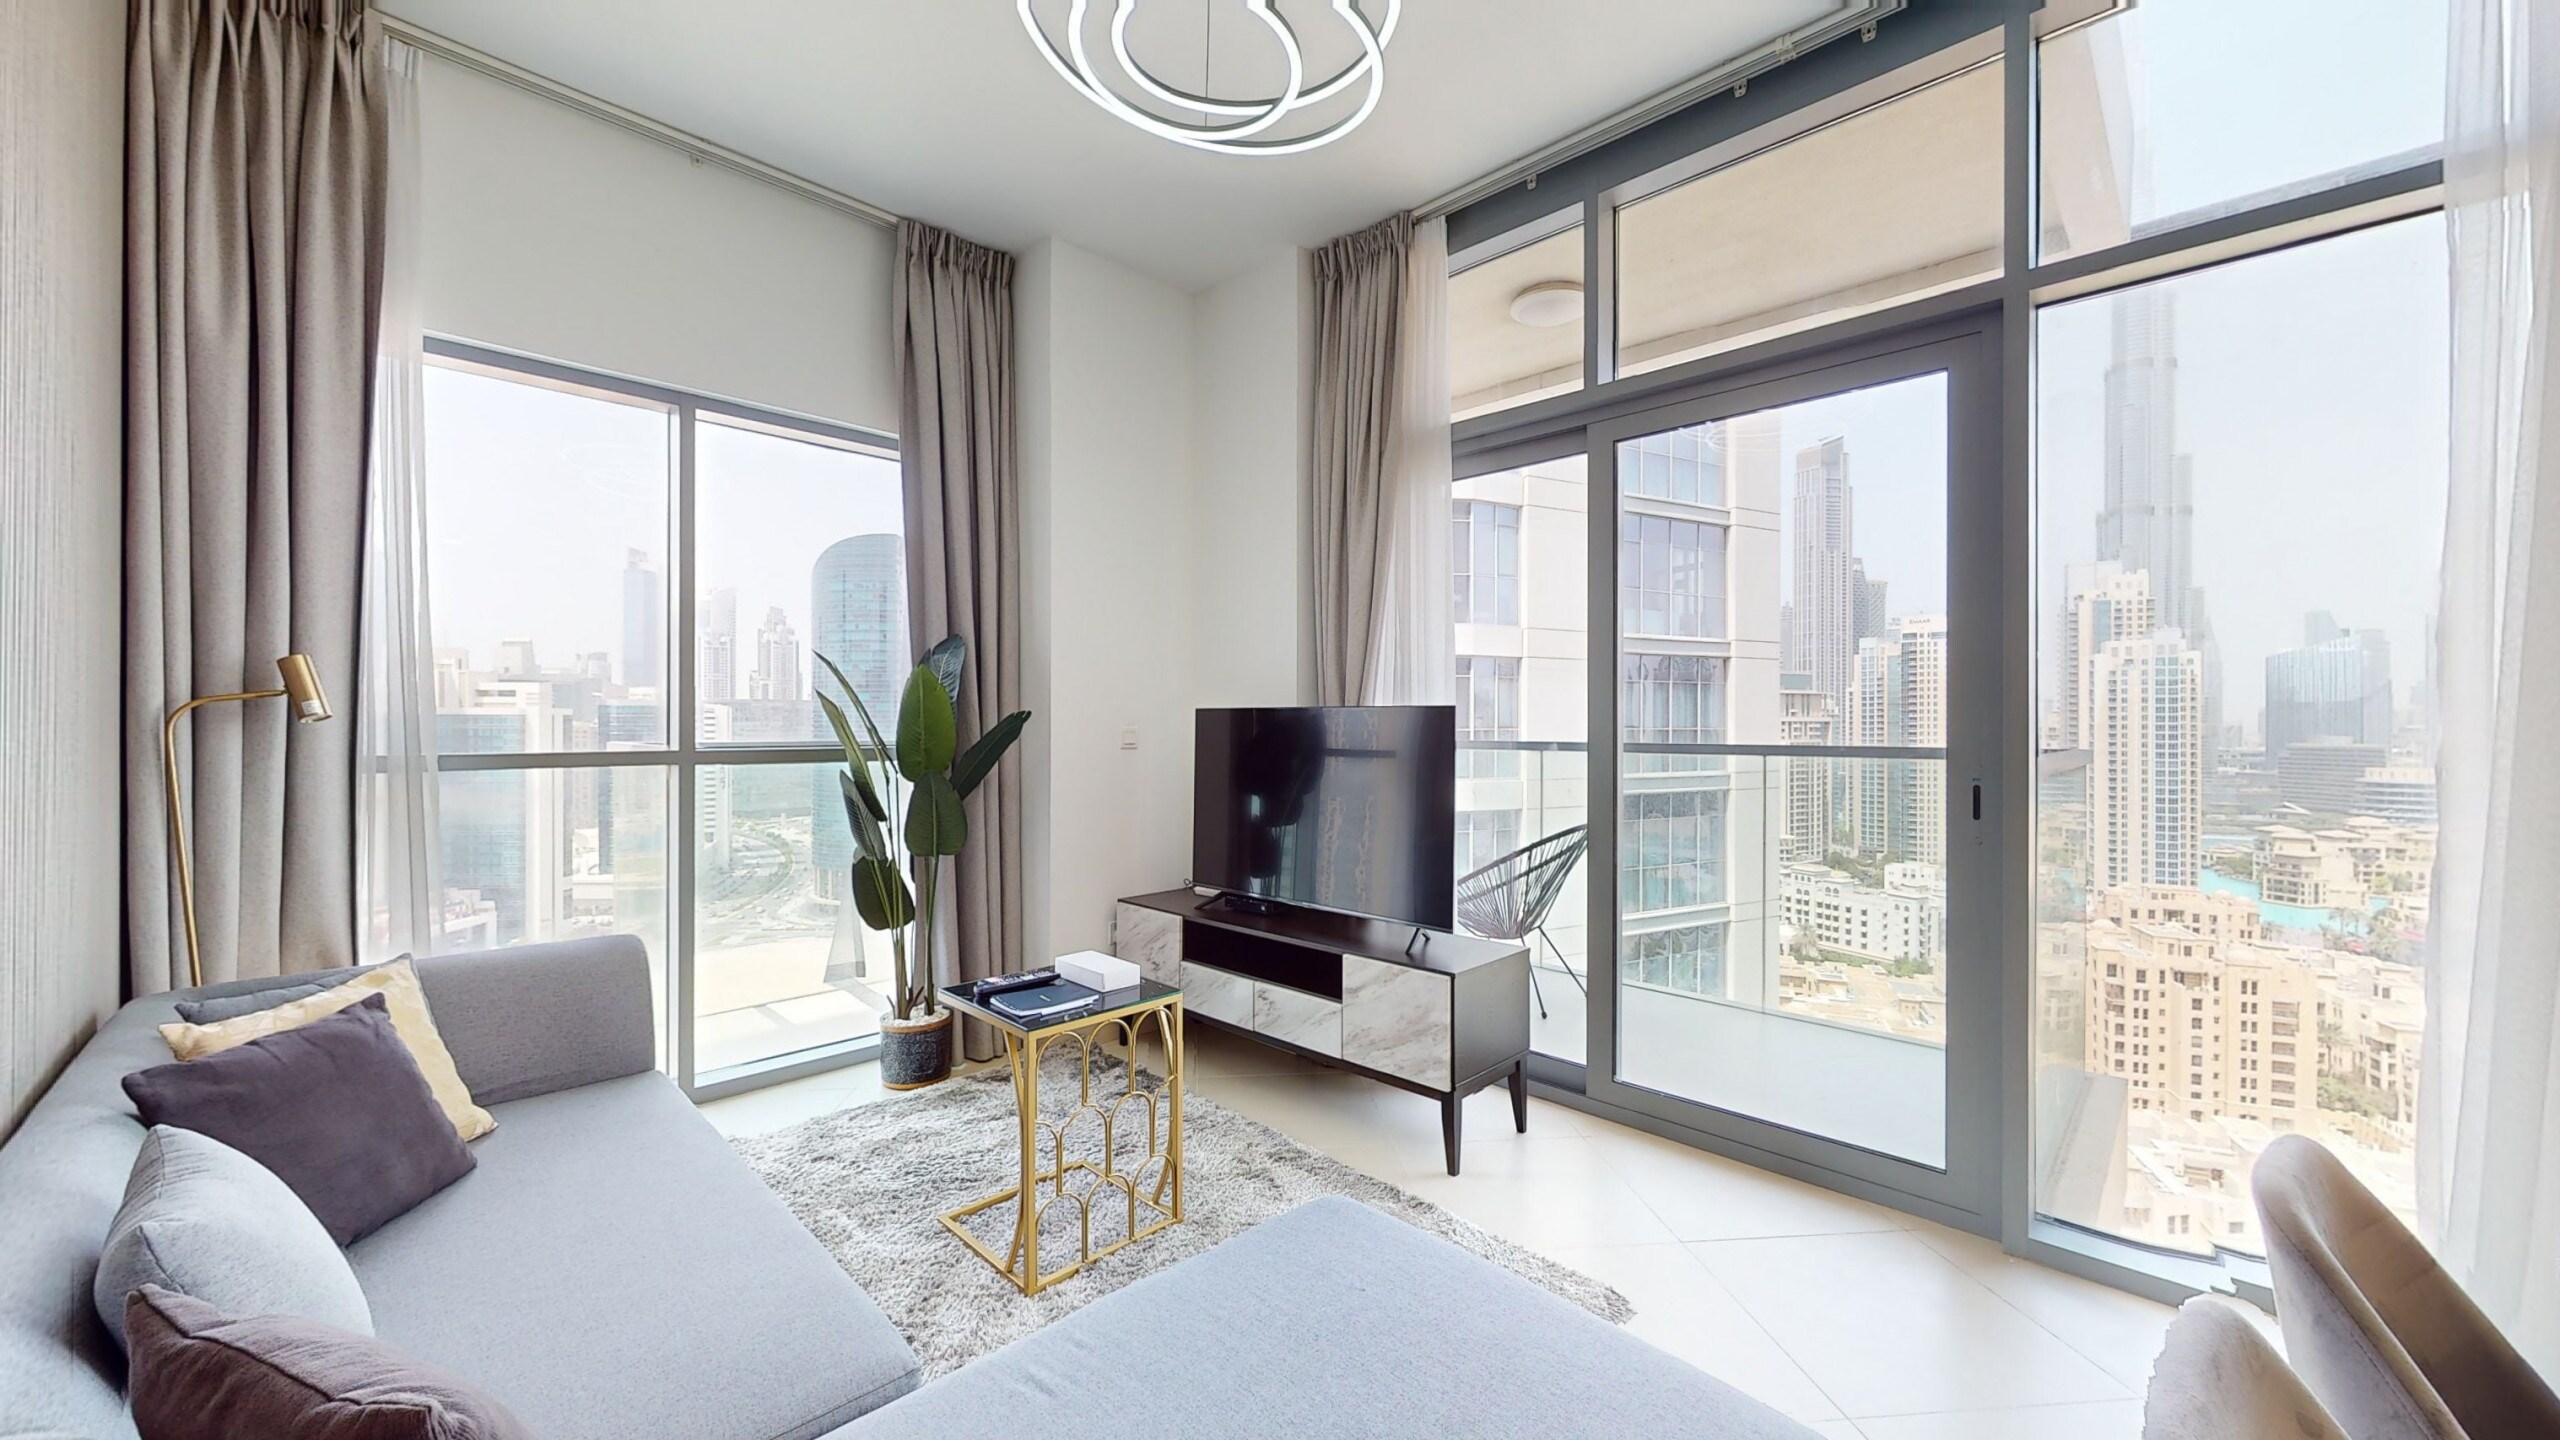 Property Image 2 - Brand new 1BR in Dowtown, near Dubai Mall